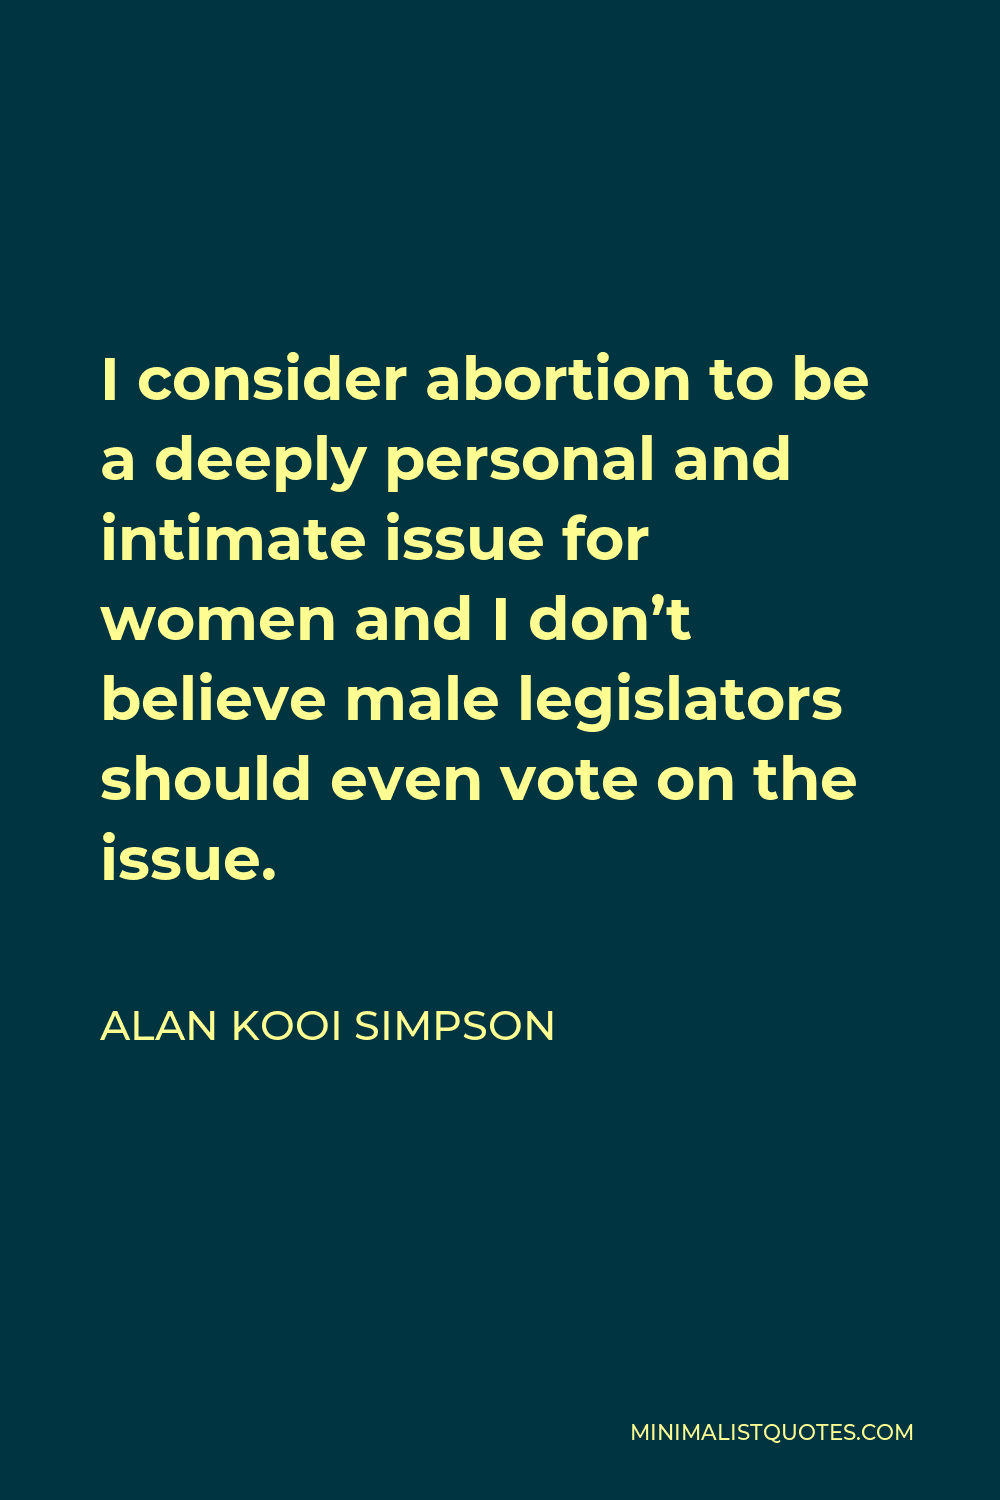 Alan Kooi Simpson Quote - I consider abortion to be a deeply personal and intimate issue for women and I don’t believe male legislators should even vote on the issue.